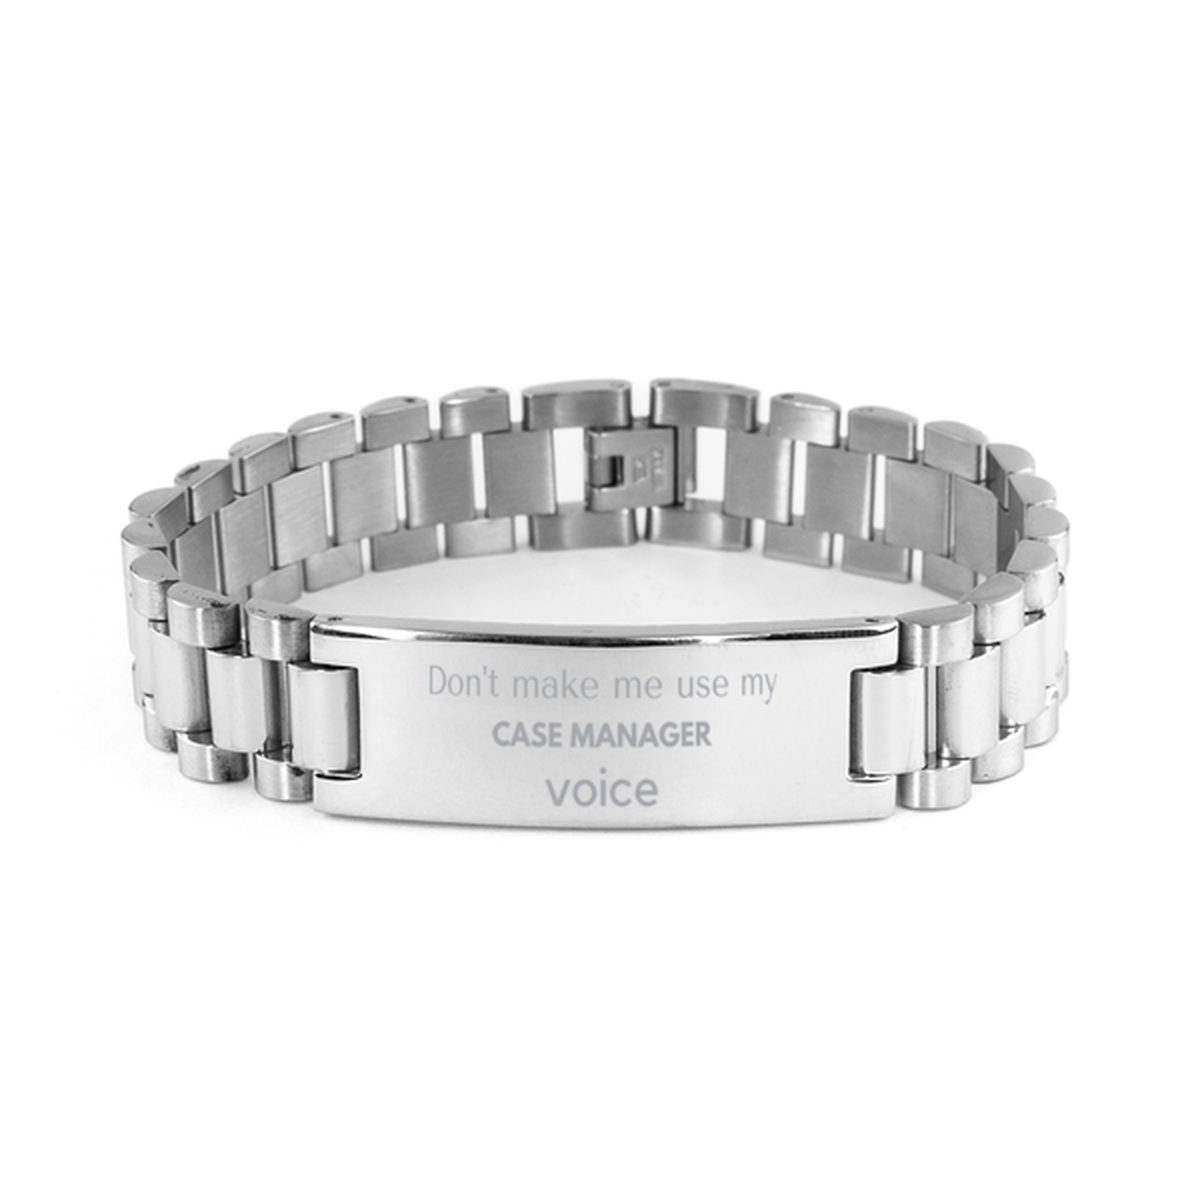 Don't make me use my Case Manager voice, Sarcasm Case Manager Gifts, Christmas Case Manager Ladder Stainless Steel Bracelet Birthday Unique Gifts For Case Manager Coworkers, Men, Women, Colleague, Friends